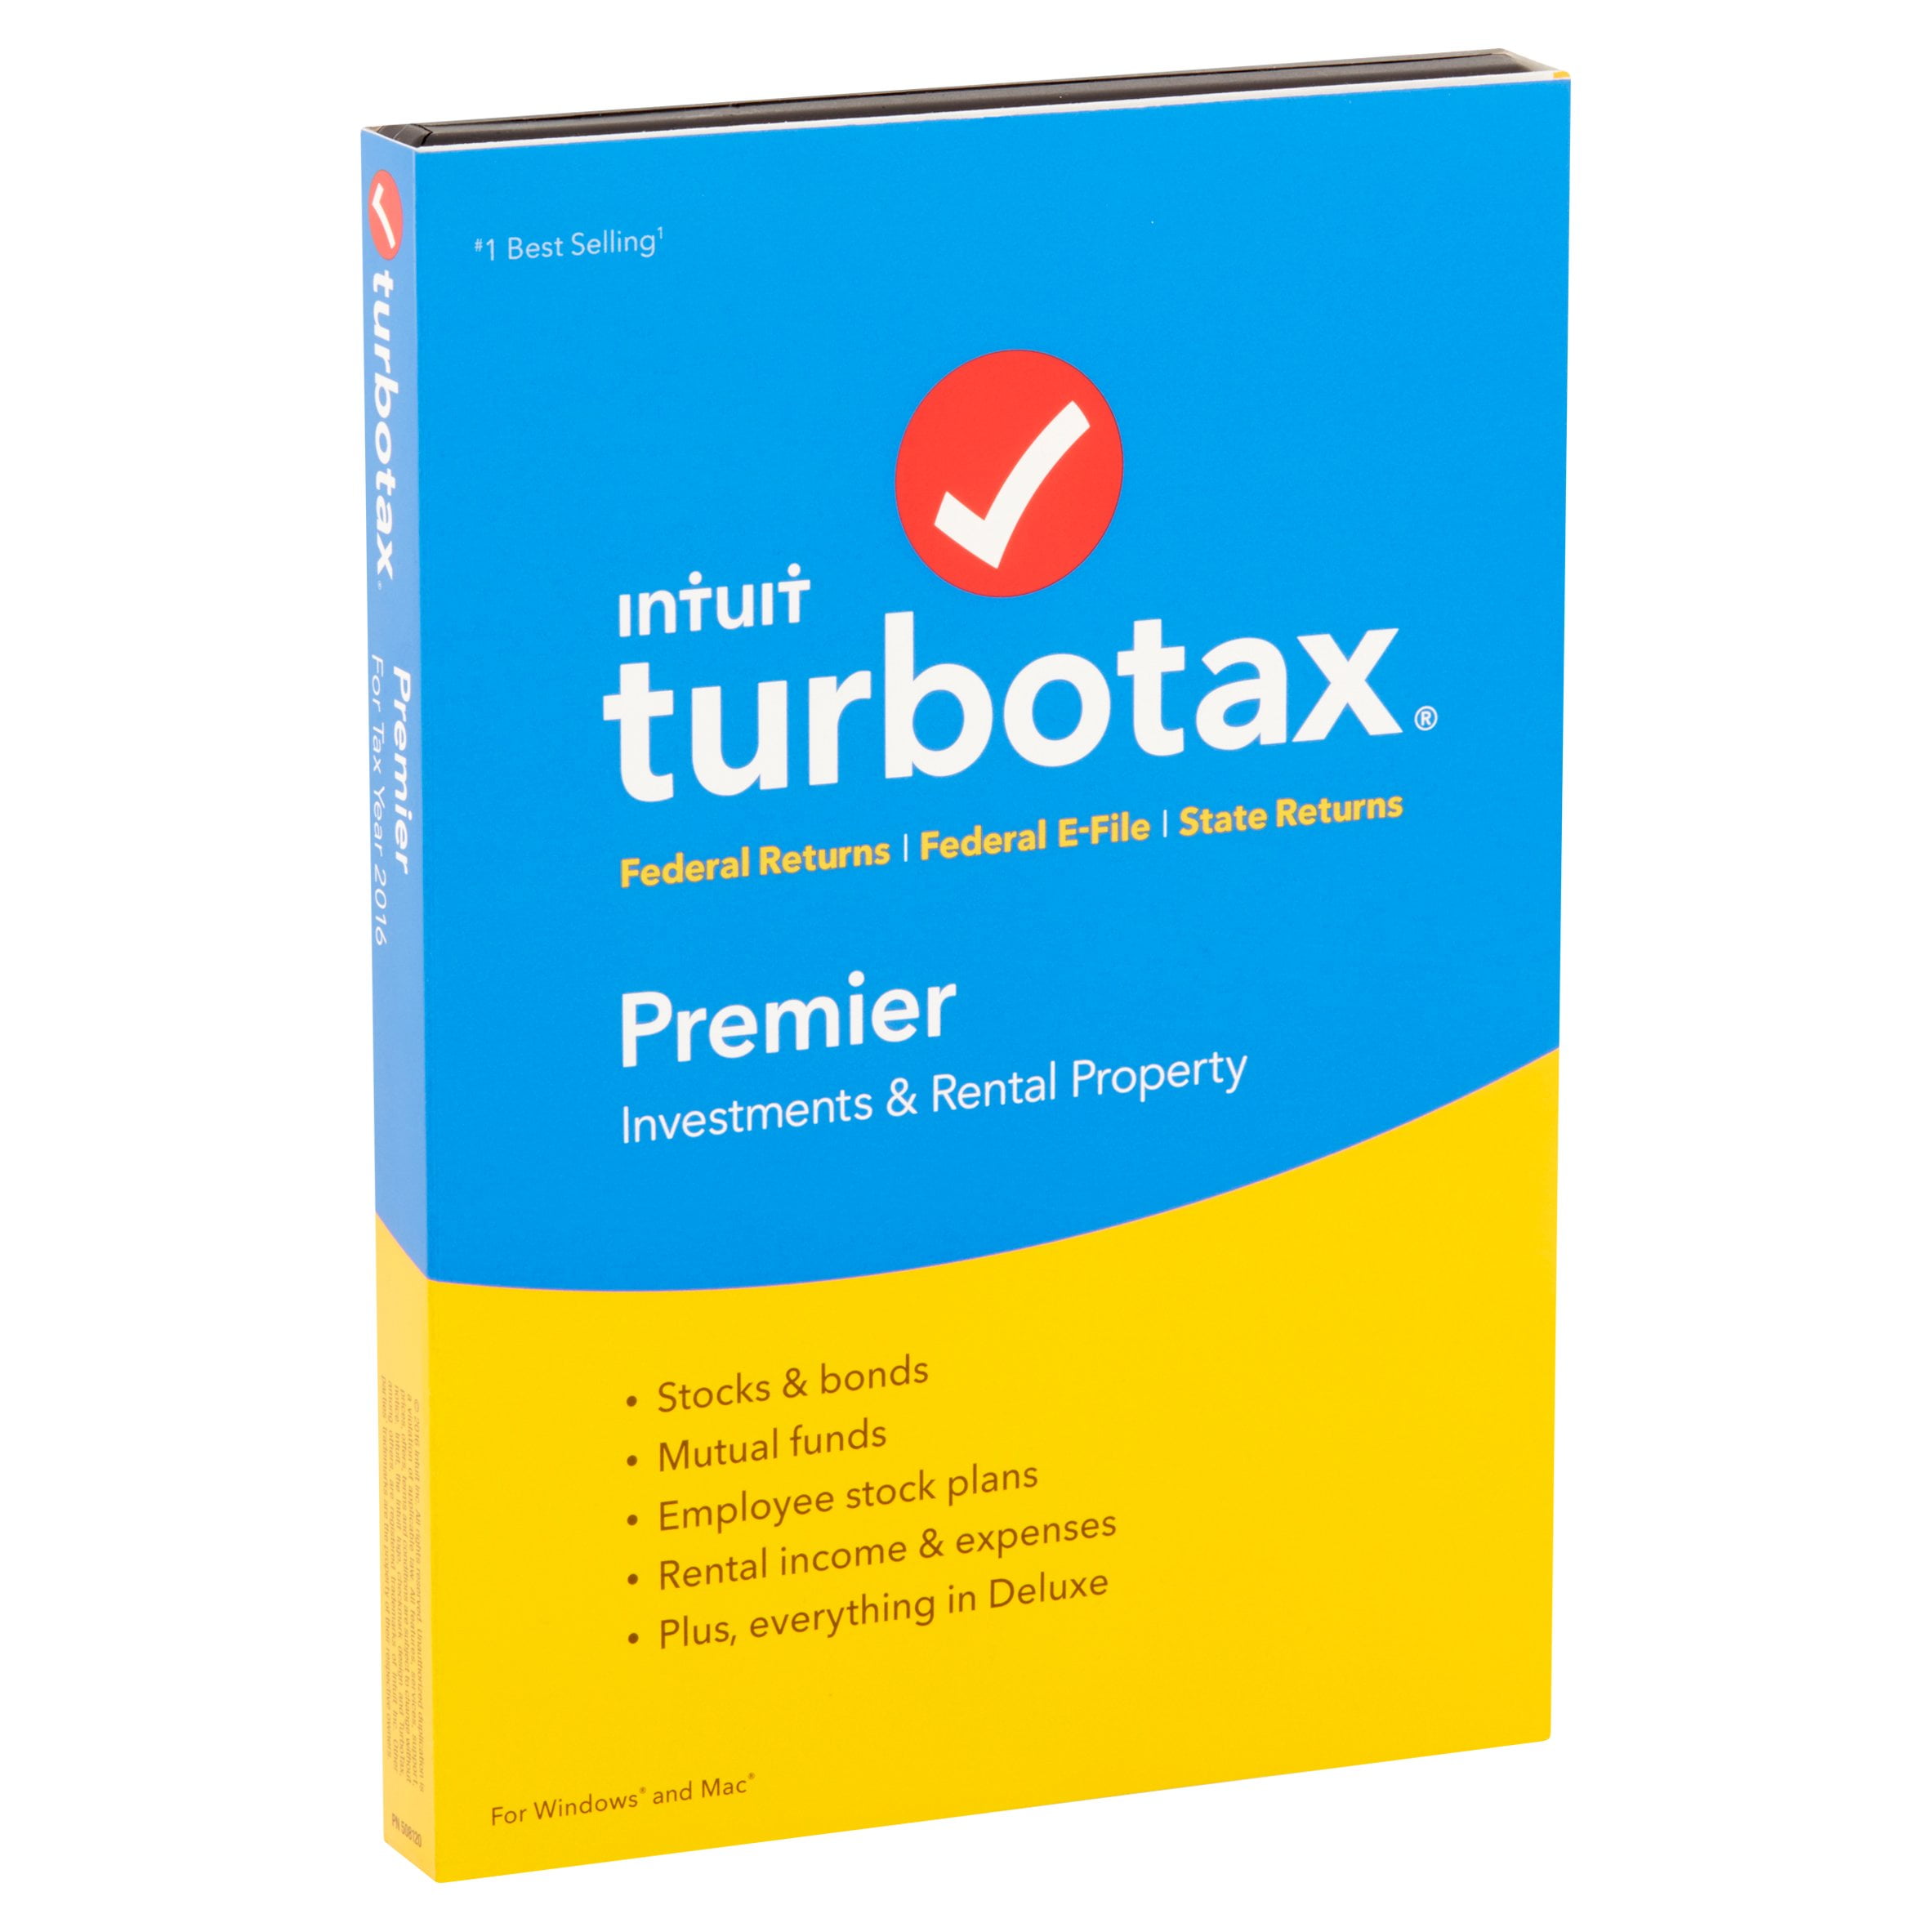 Turbotax 2017 deluxe federal plus state returns